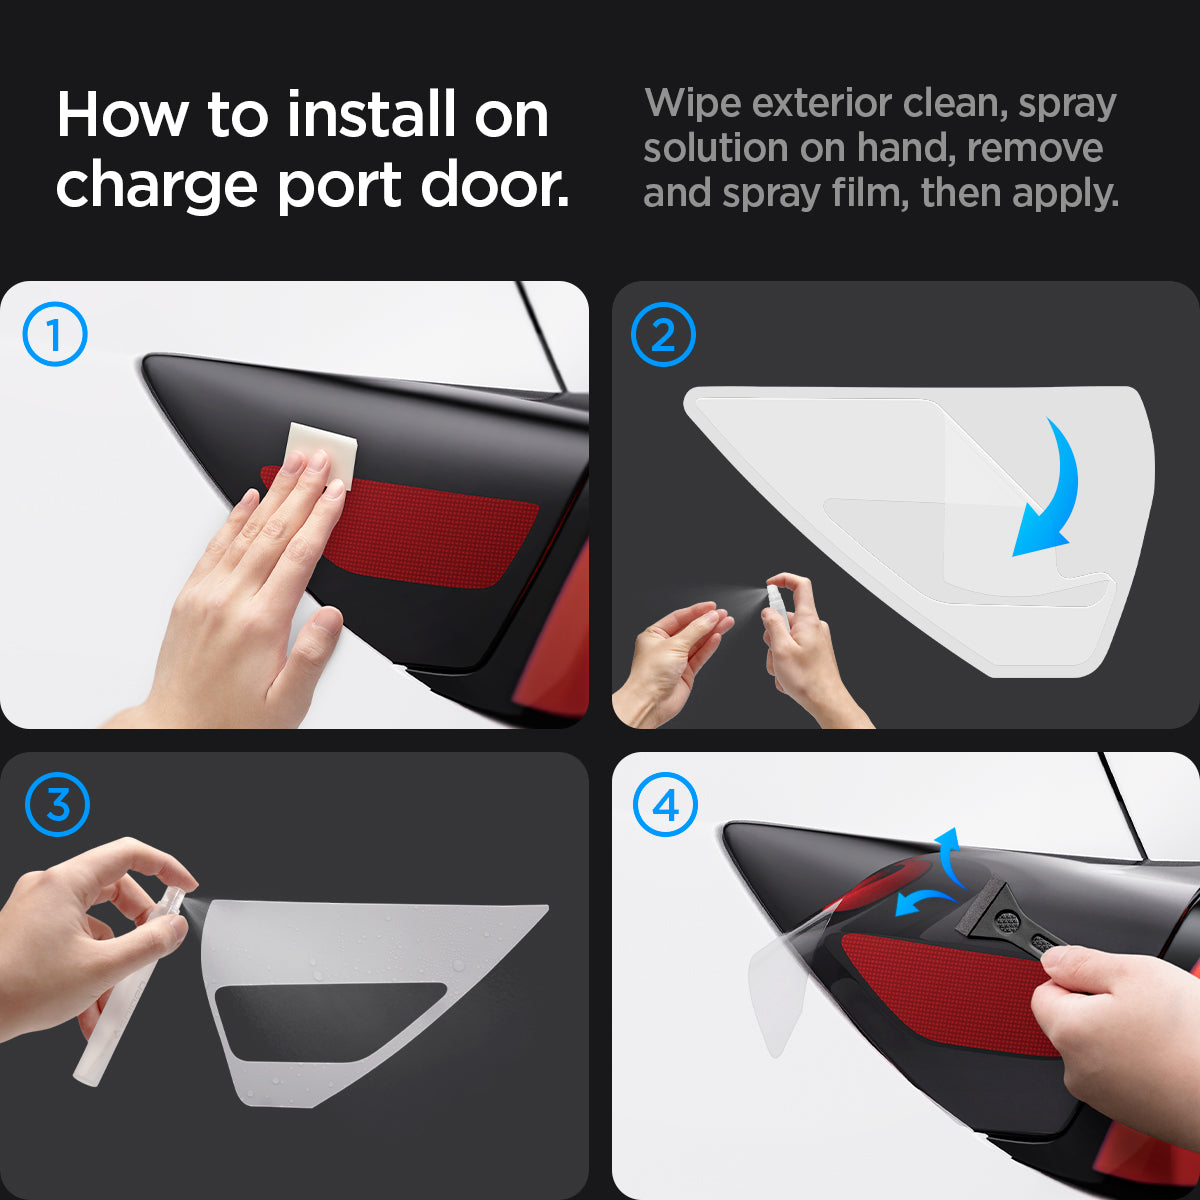 AFL07153 - Tesla Model Y & 3 Charging Port Protective Film in Transparency showing the installation on charge port door. Wipe exterior clean, spray solution on hand, remove and spray film, then apply